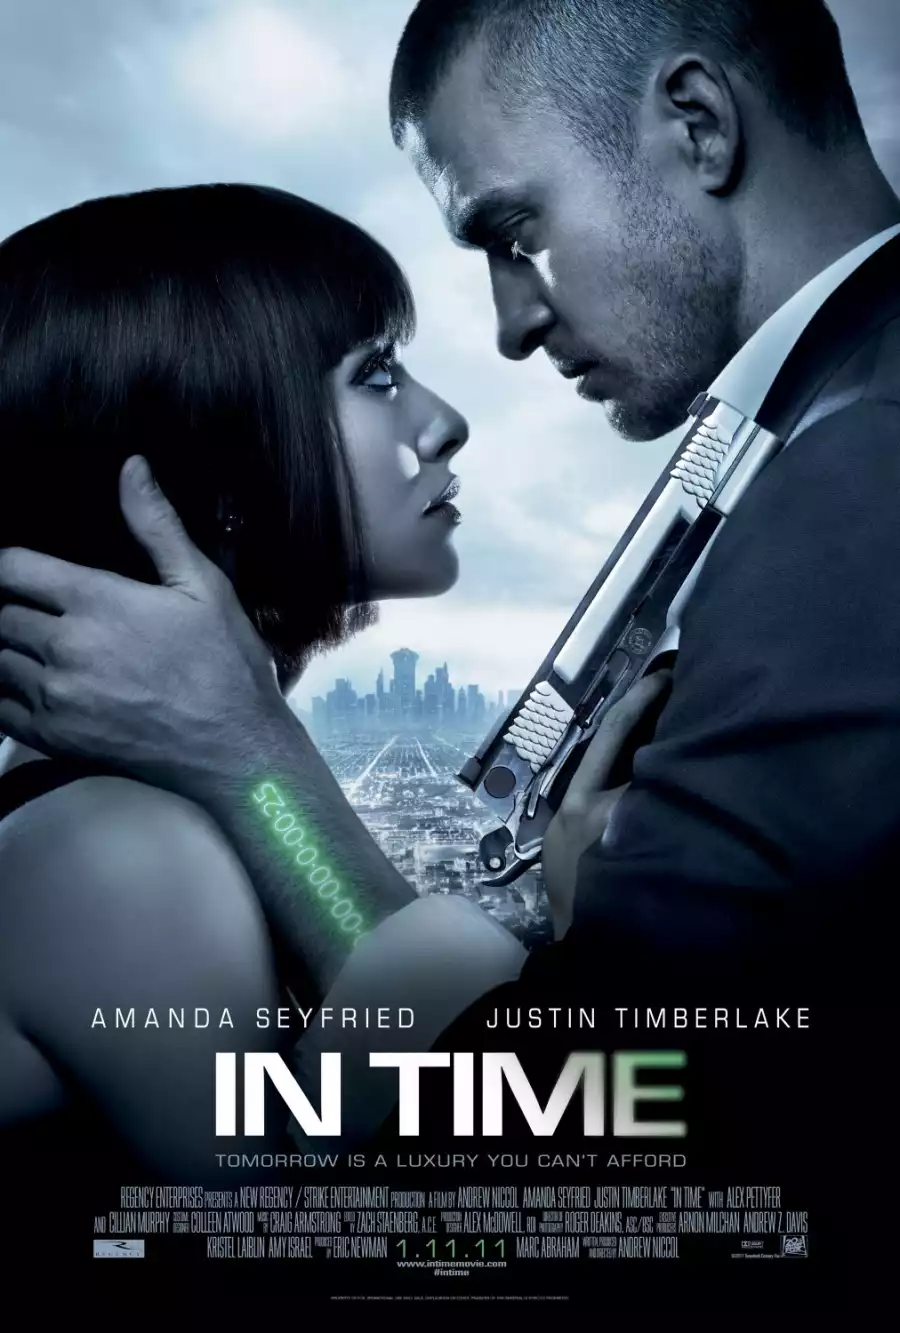 time travel movie download in hindi 480p